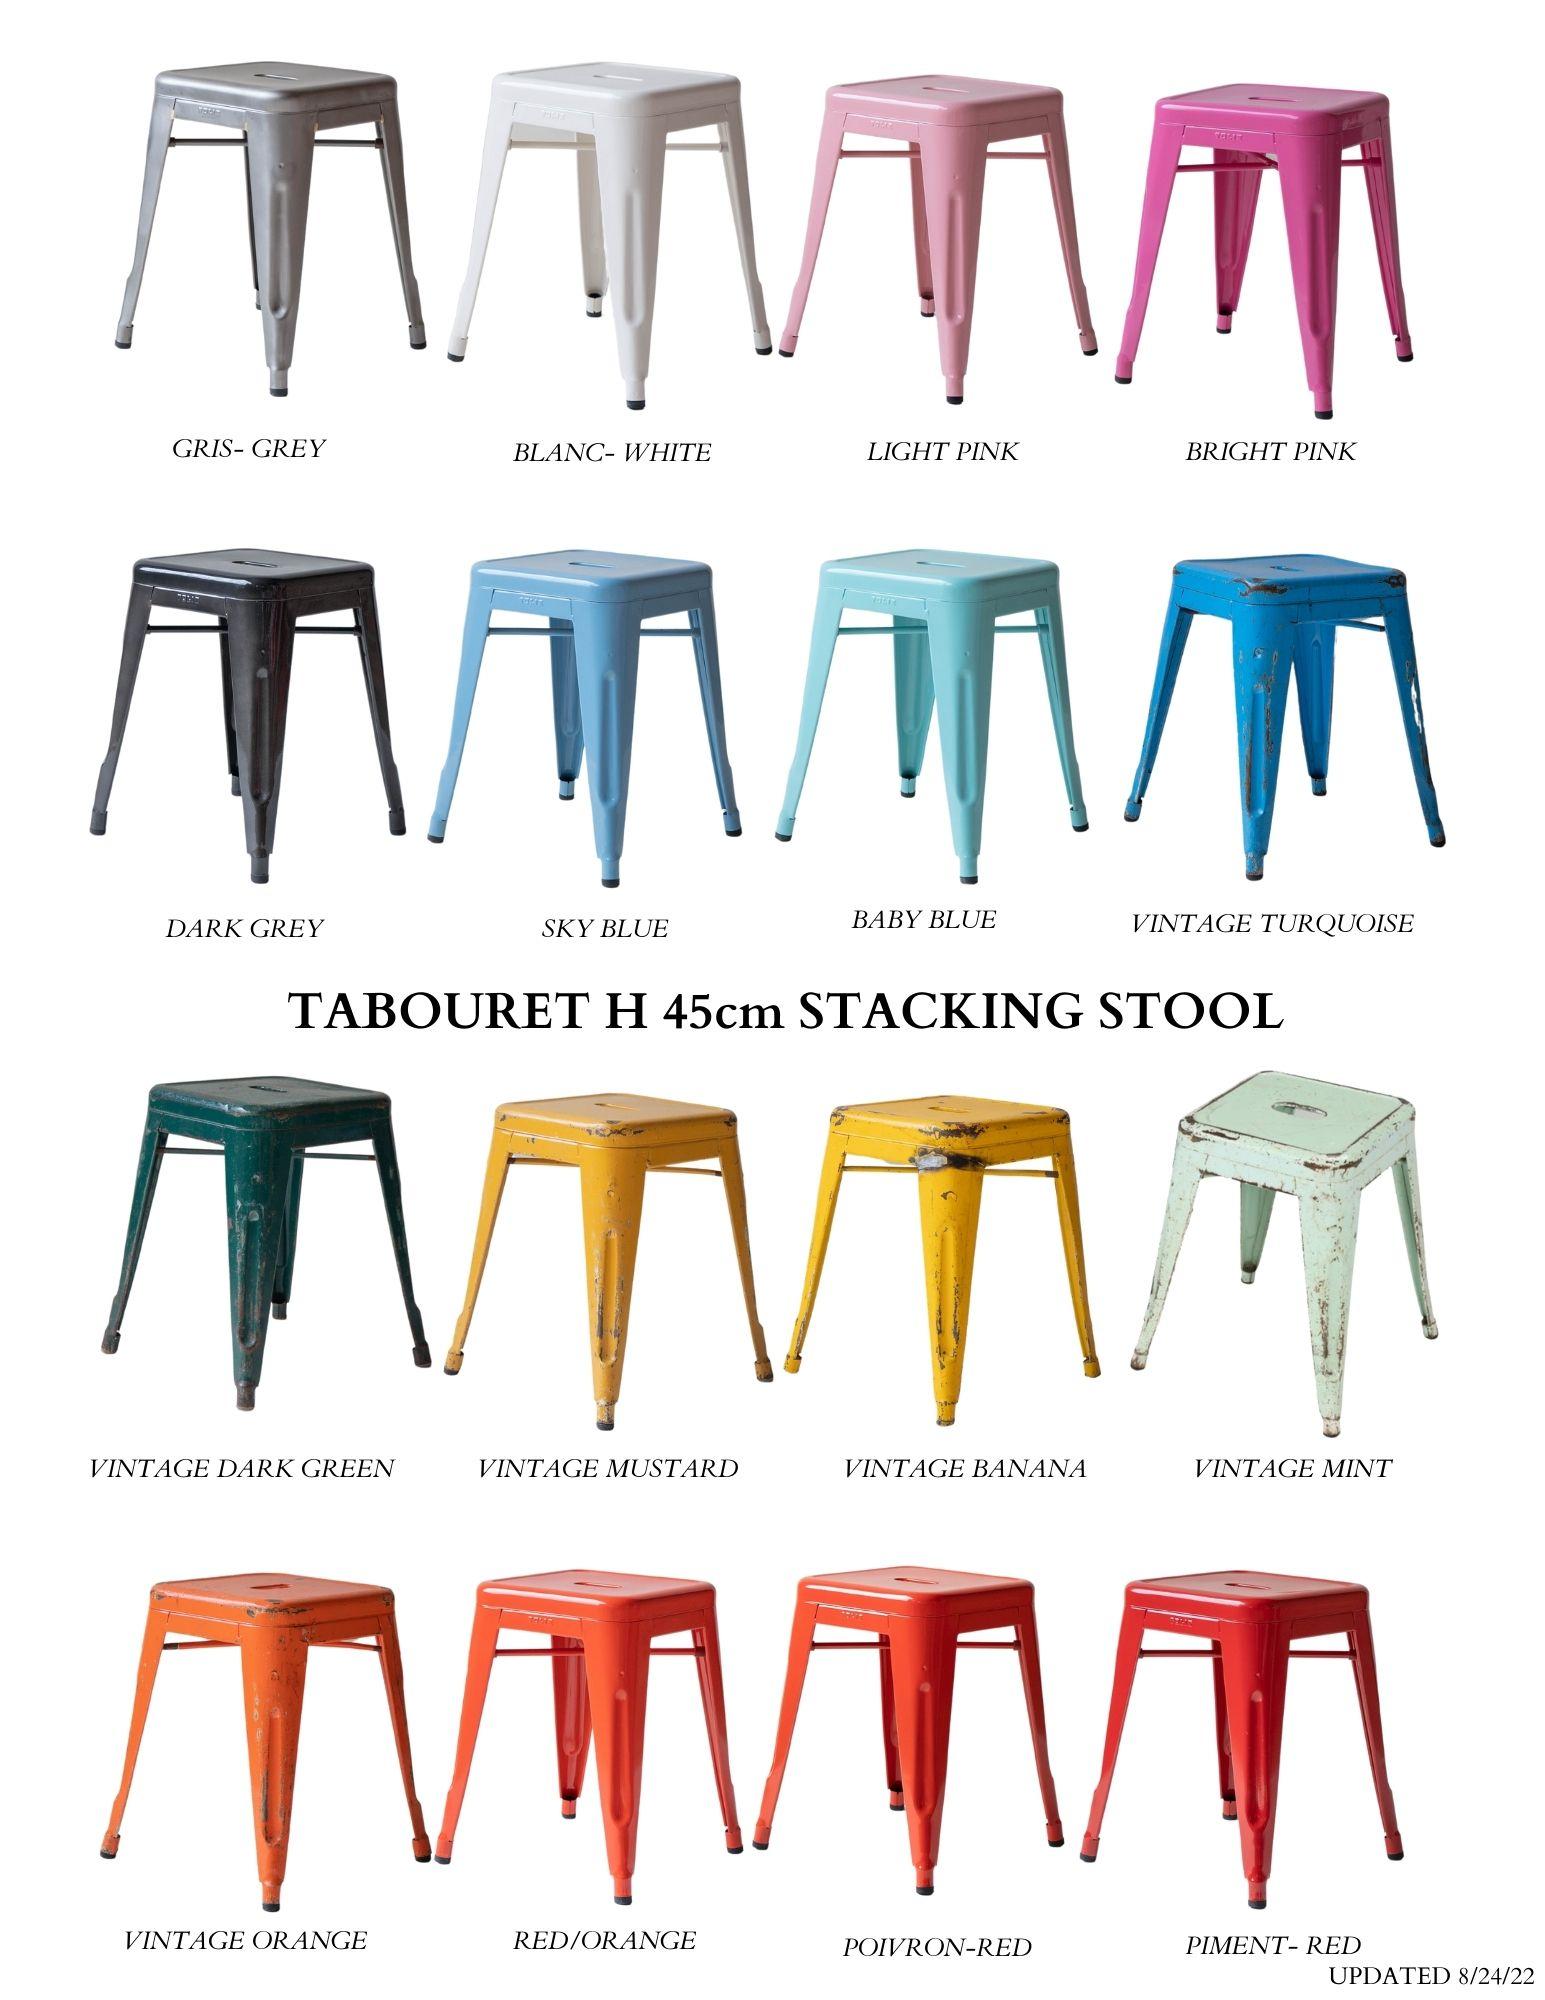 Hand-Painted Genuine Tolix Steel Stacking Stools Made in France